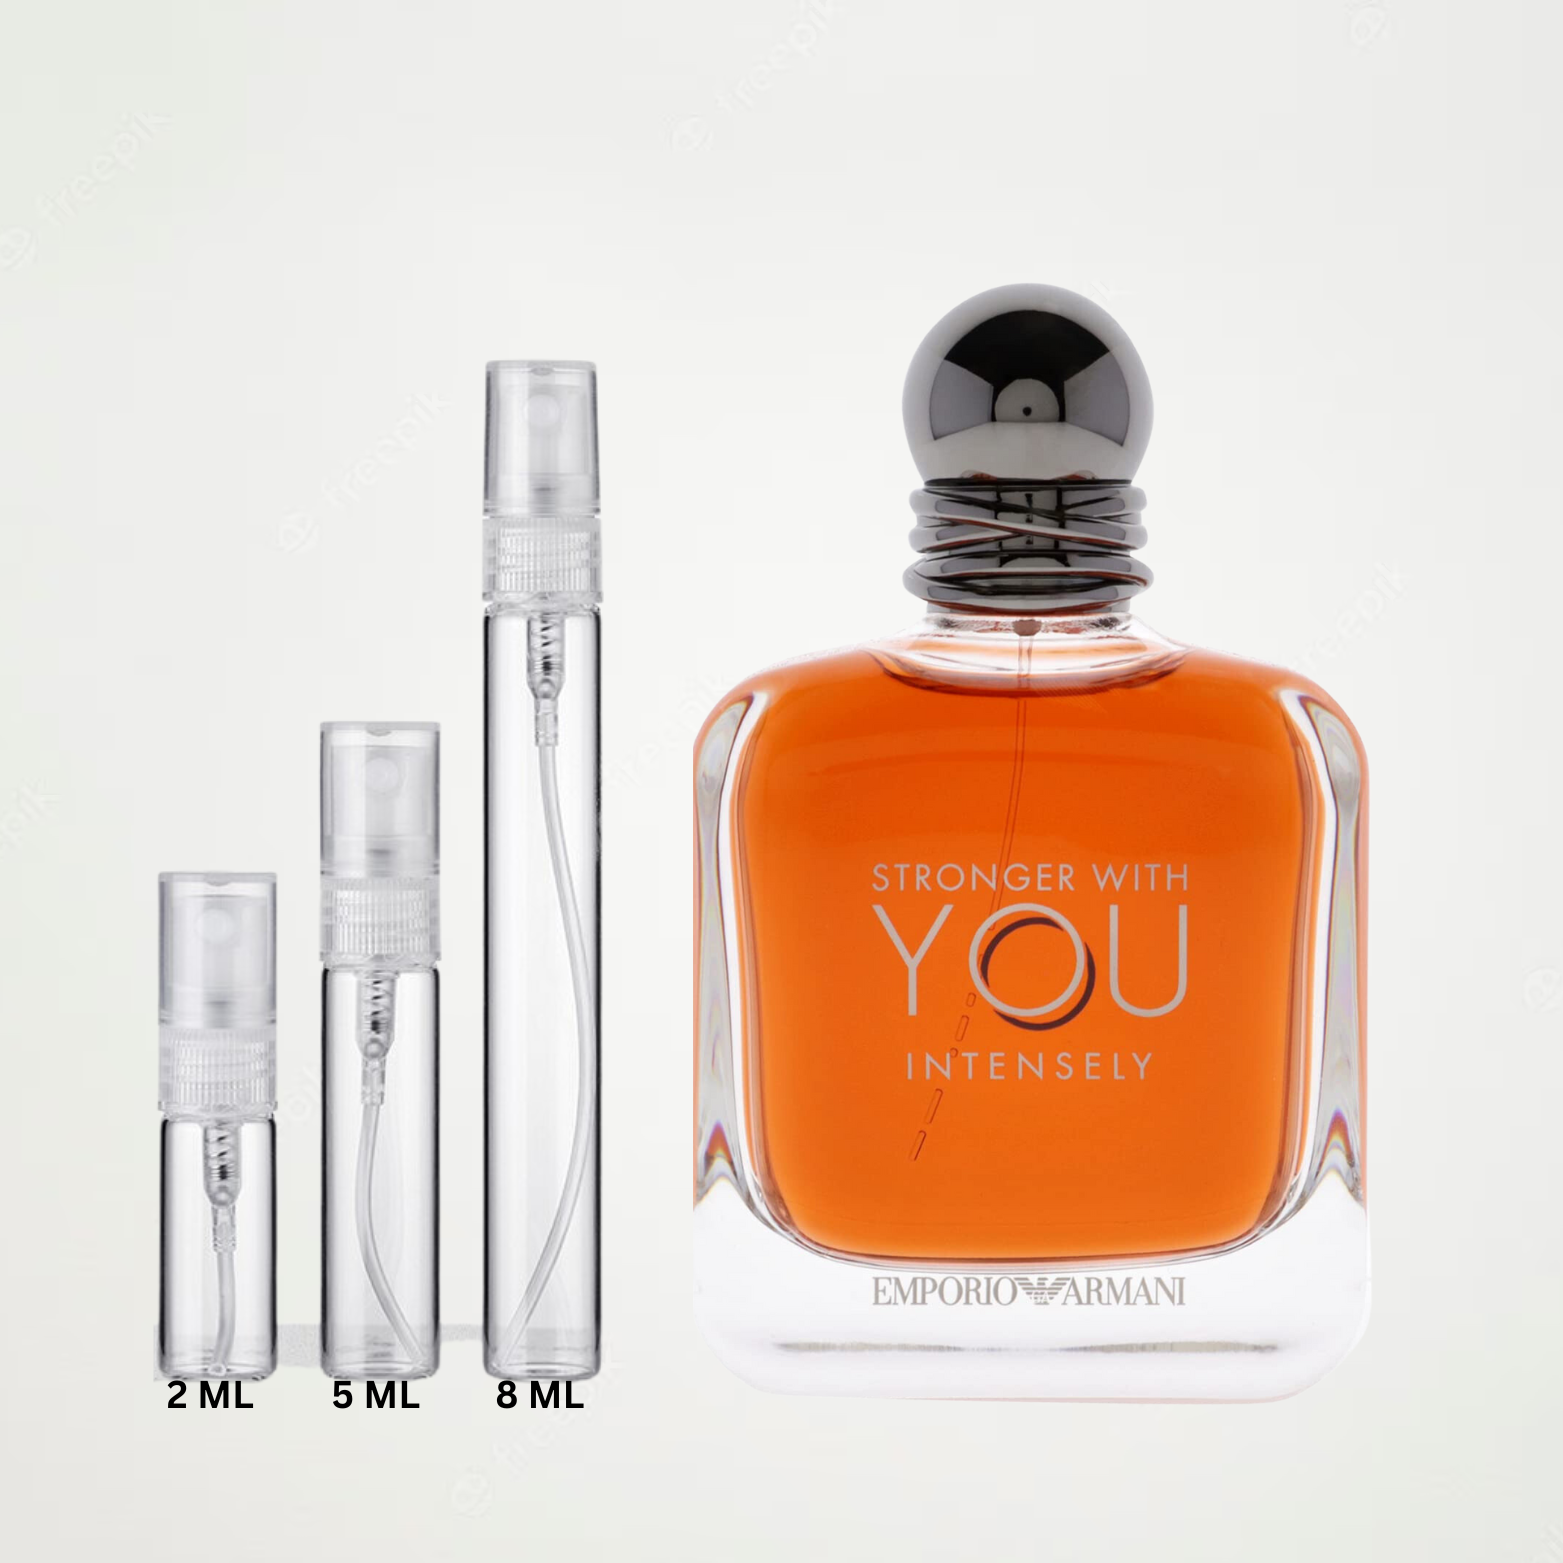 Emporio Armani Stronger With You Intensely (EDP)